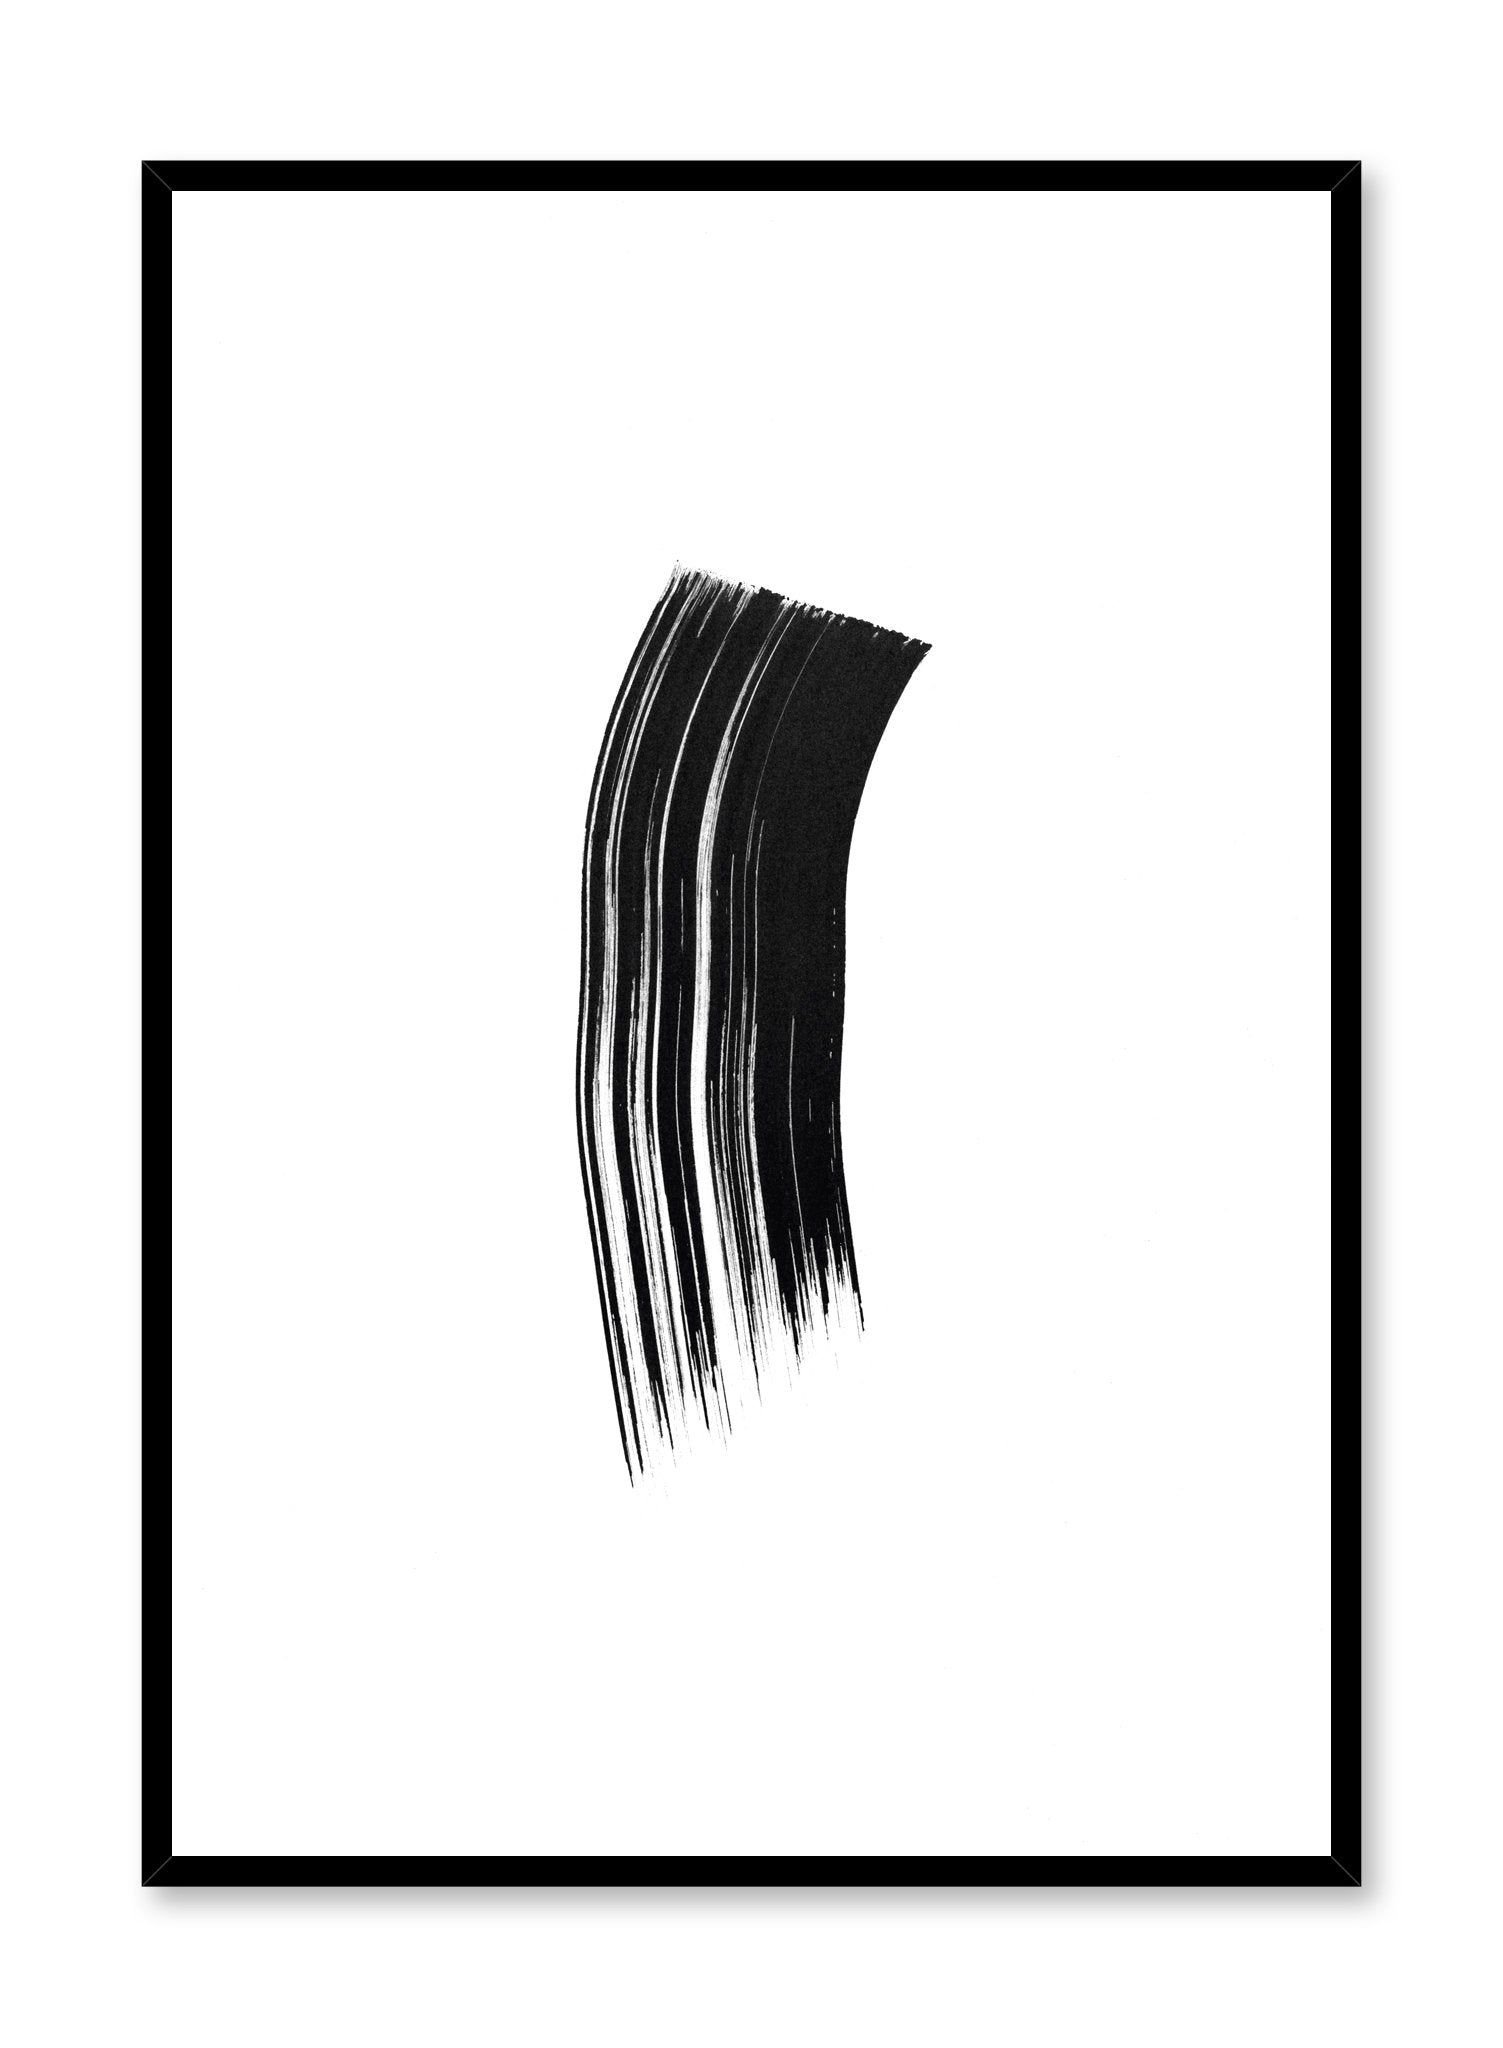 Modern minimalist poster by Opposite Wall with black ink design